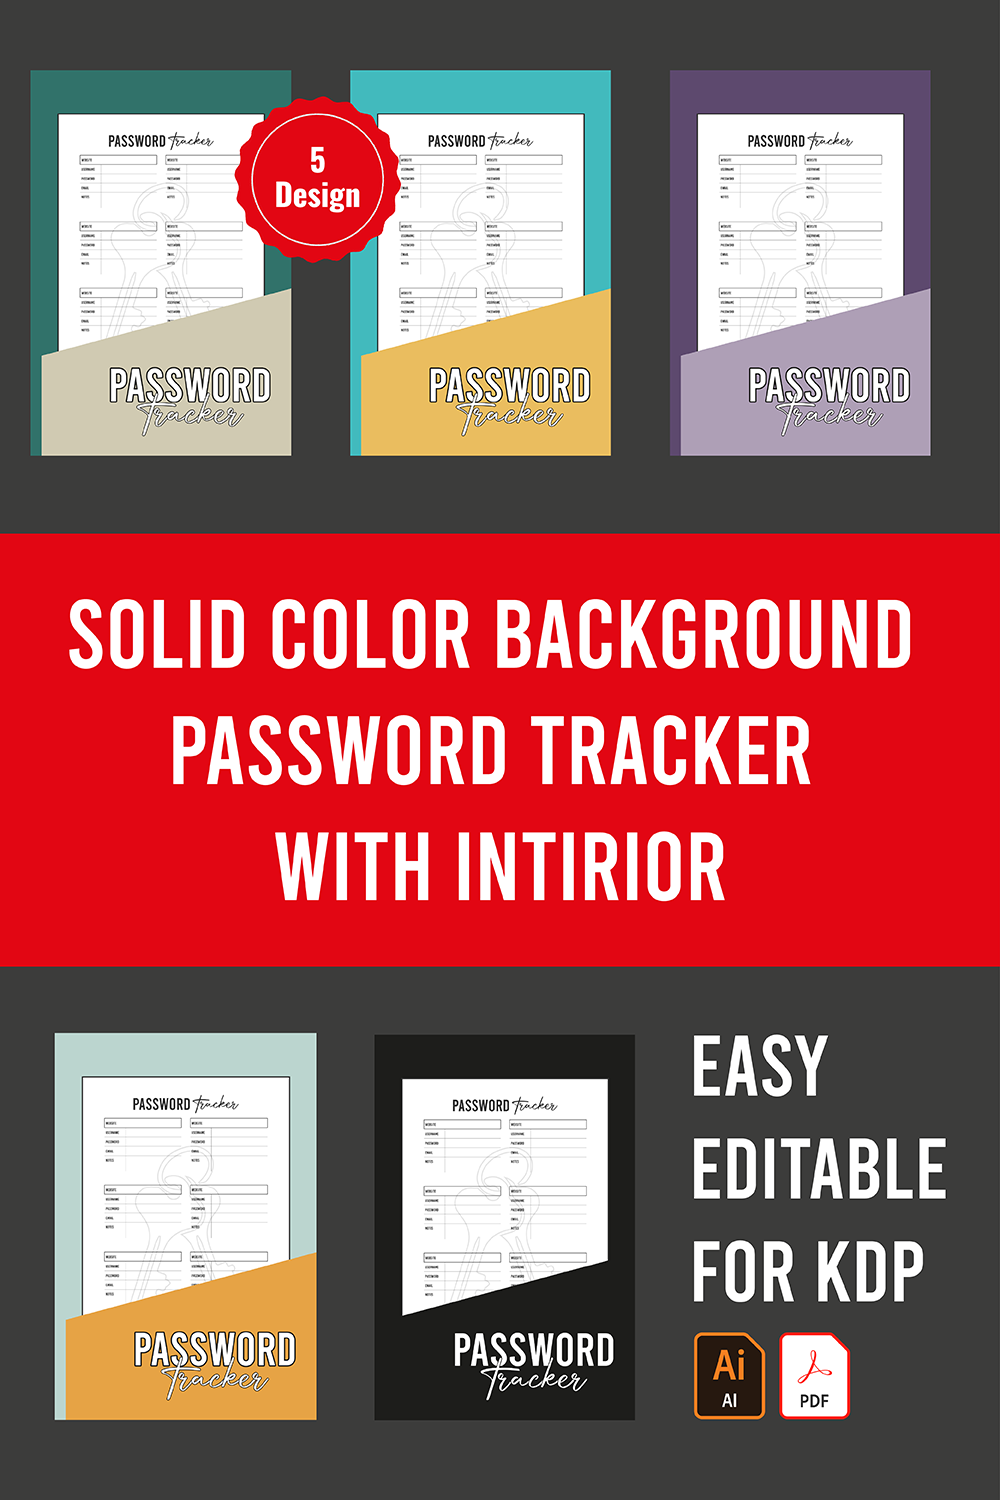 Solid Color Background Password Tracker pinterest image.